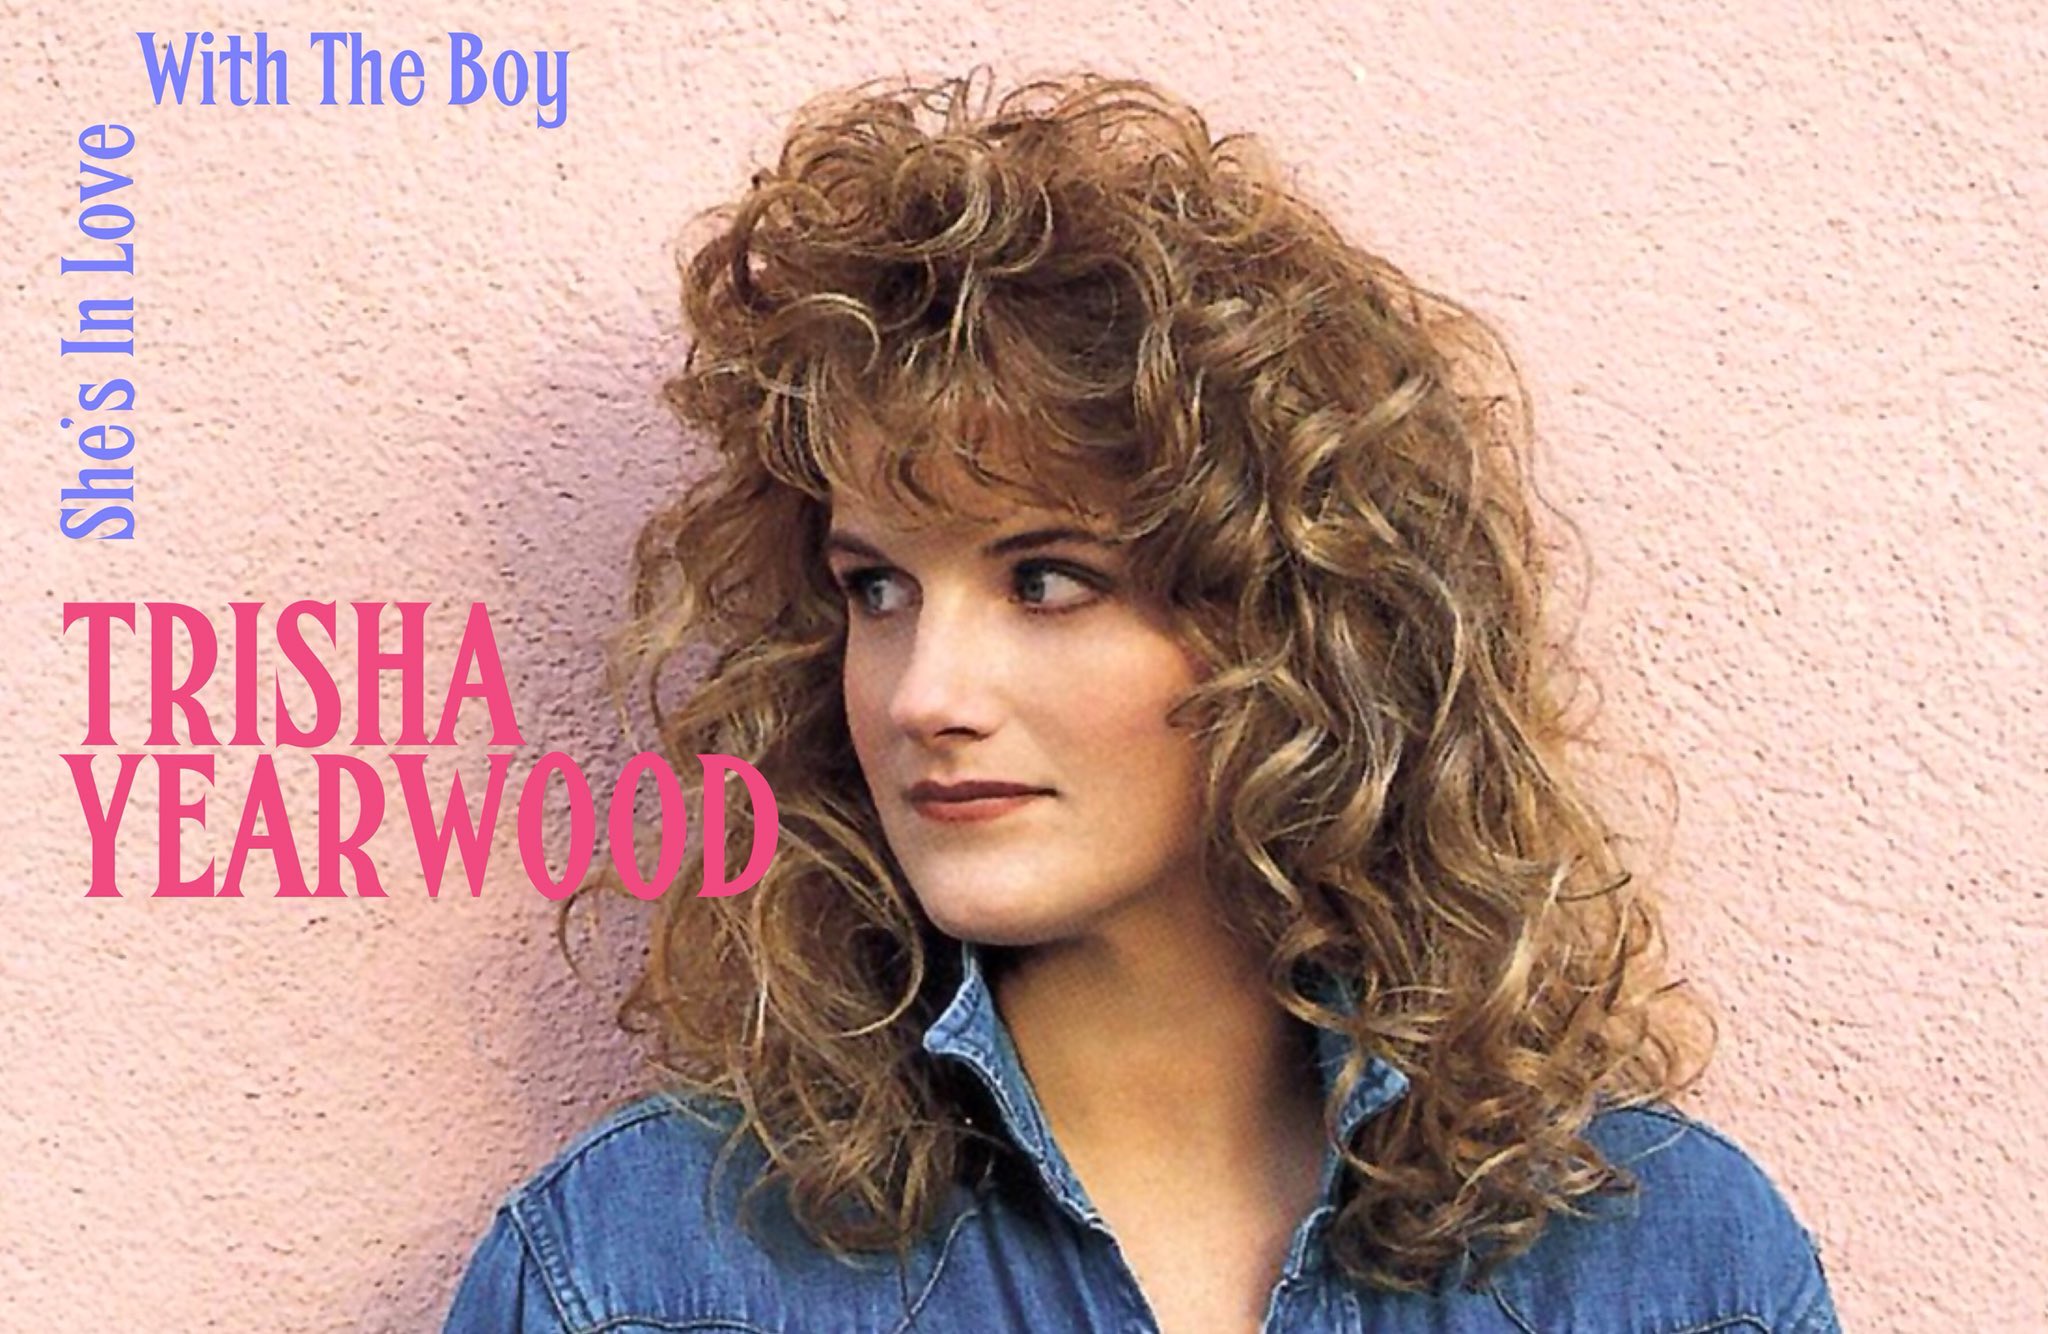 RetroNewsNow on X: "🎶@trishayearwood released her song 'She's in Love with  the Boy' 29 years ago today, March 29, 1991 https://t.co/3vYvxGuOBs" / X